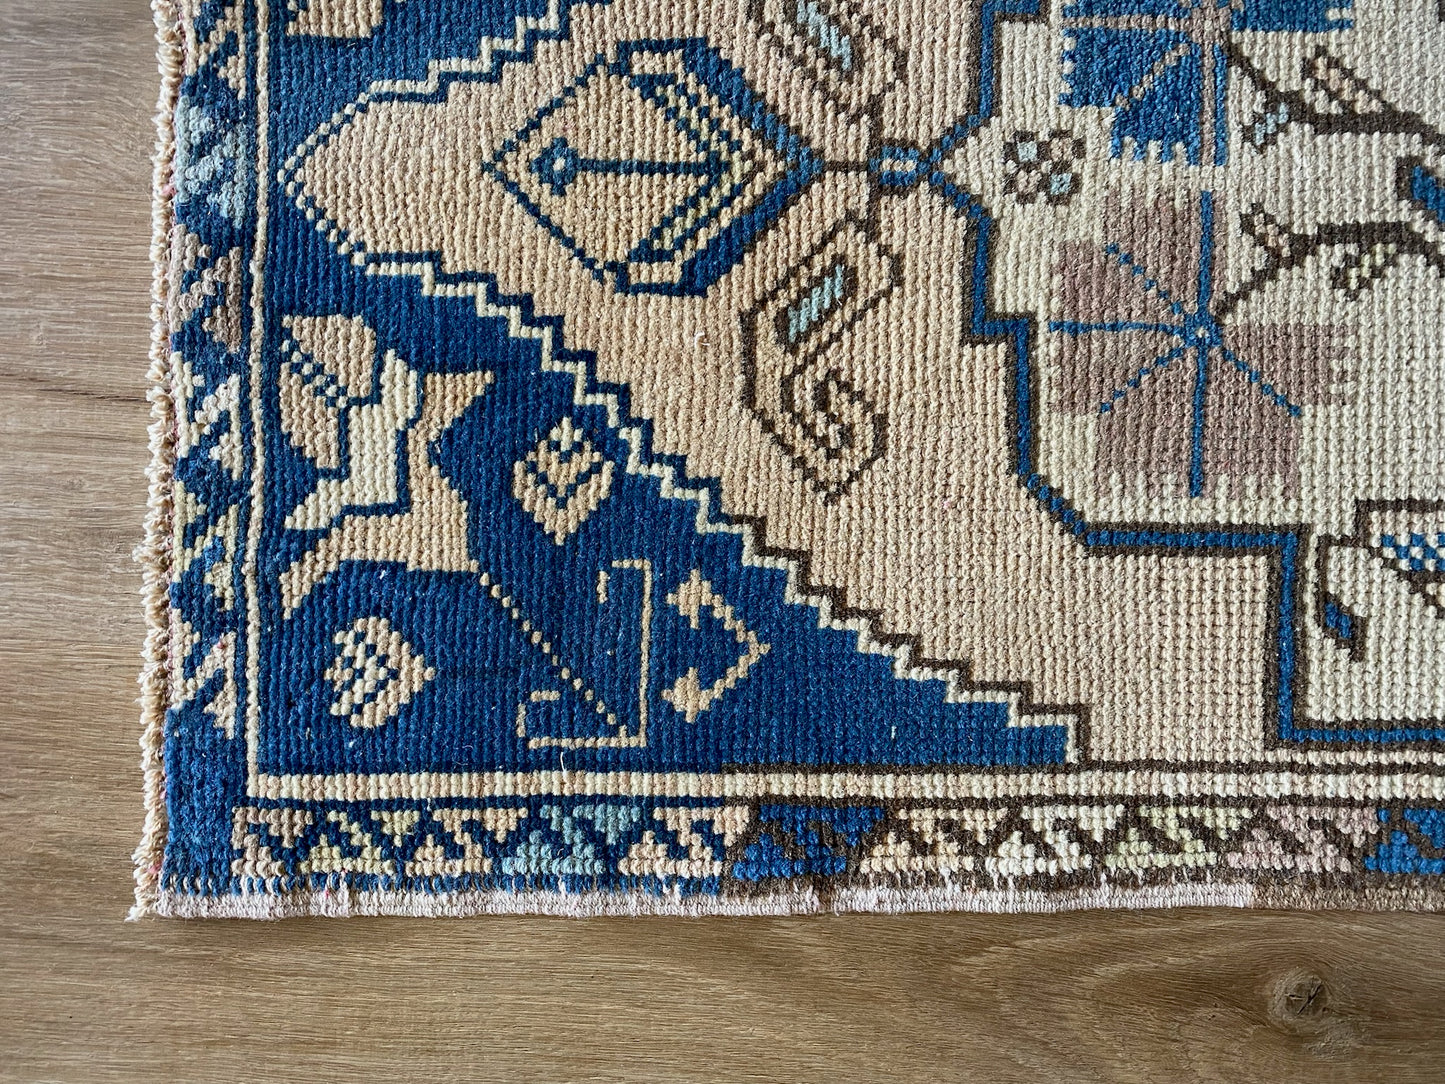 21" X 37" Blue and Terracotta Small Vintage Rug